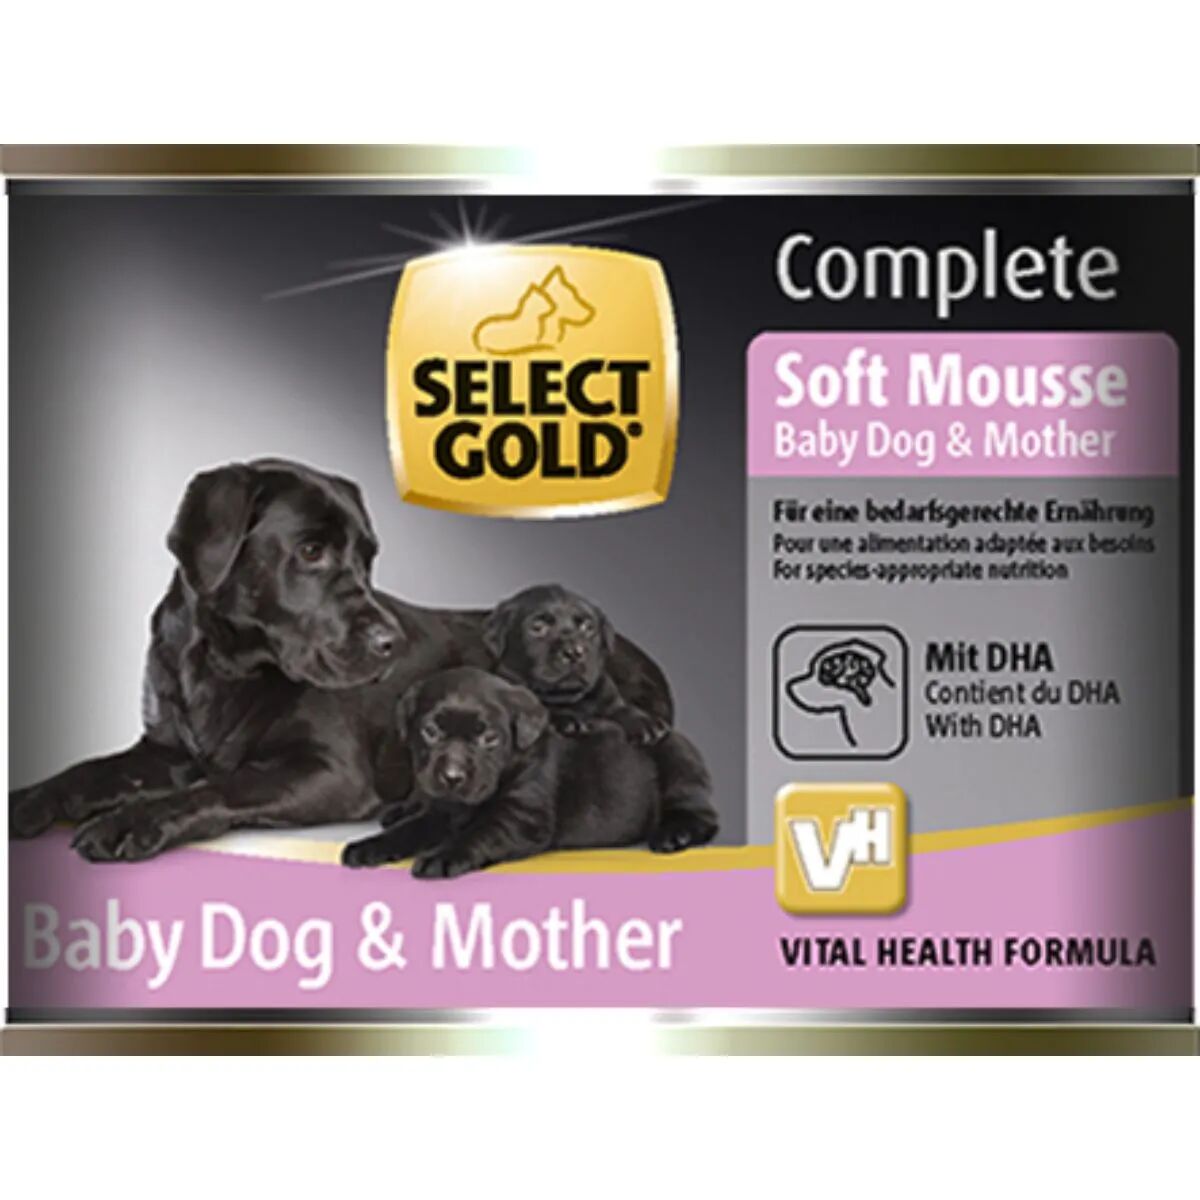 SELECT GOLD Complete Soft Mousse Baby Dog&Mother Lattina Multipack 6x180G POLLO